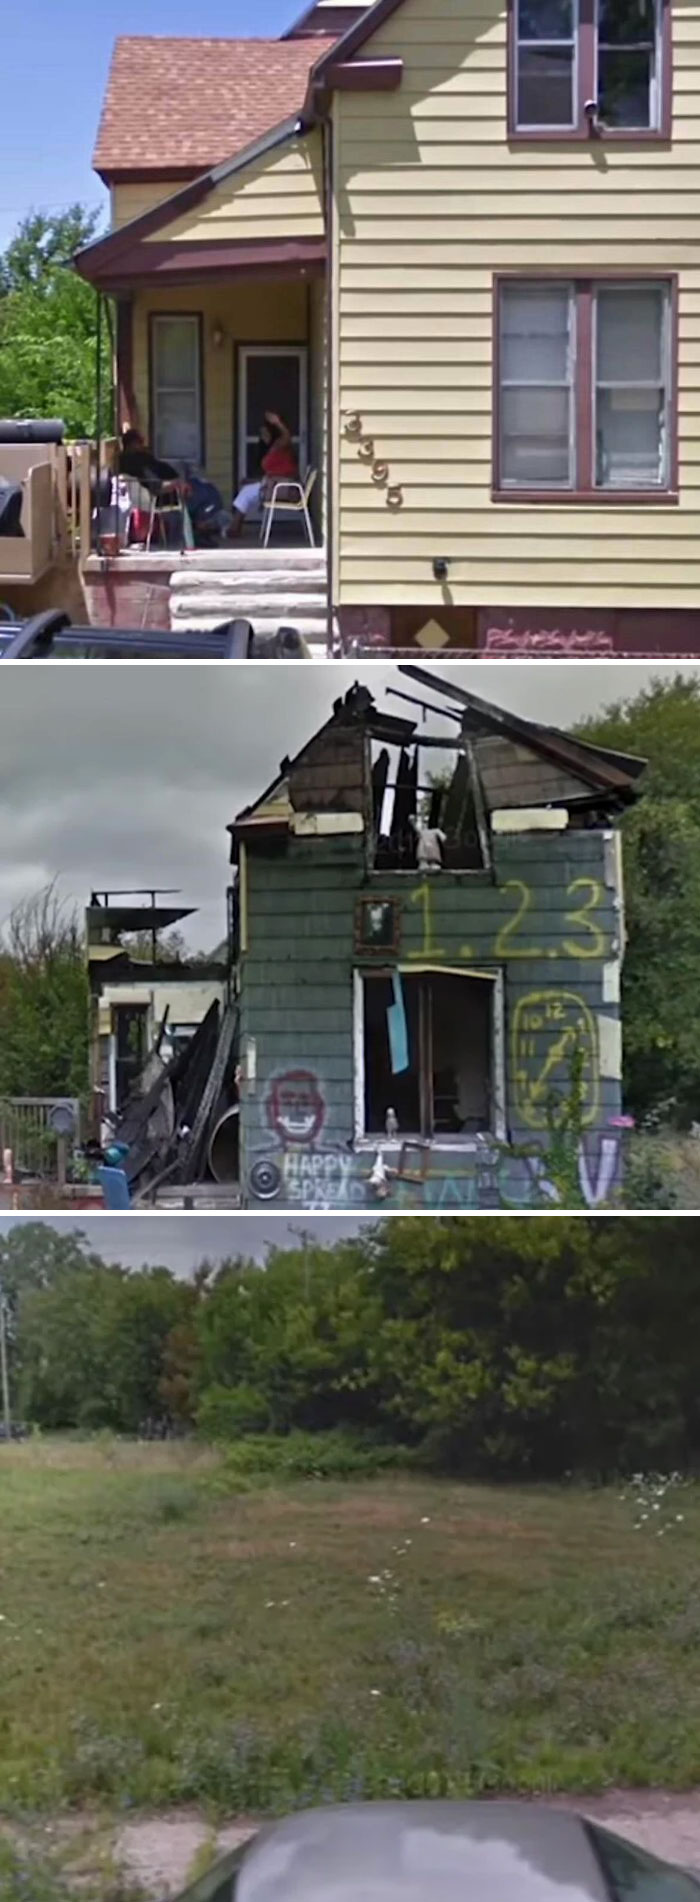 Small Home In Detroit 2009, 2011 And 2015